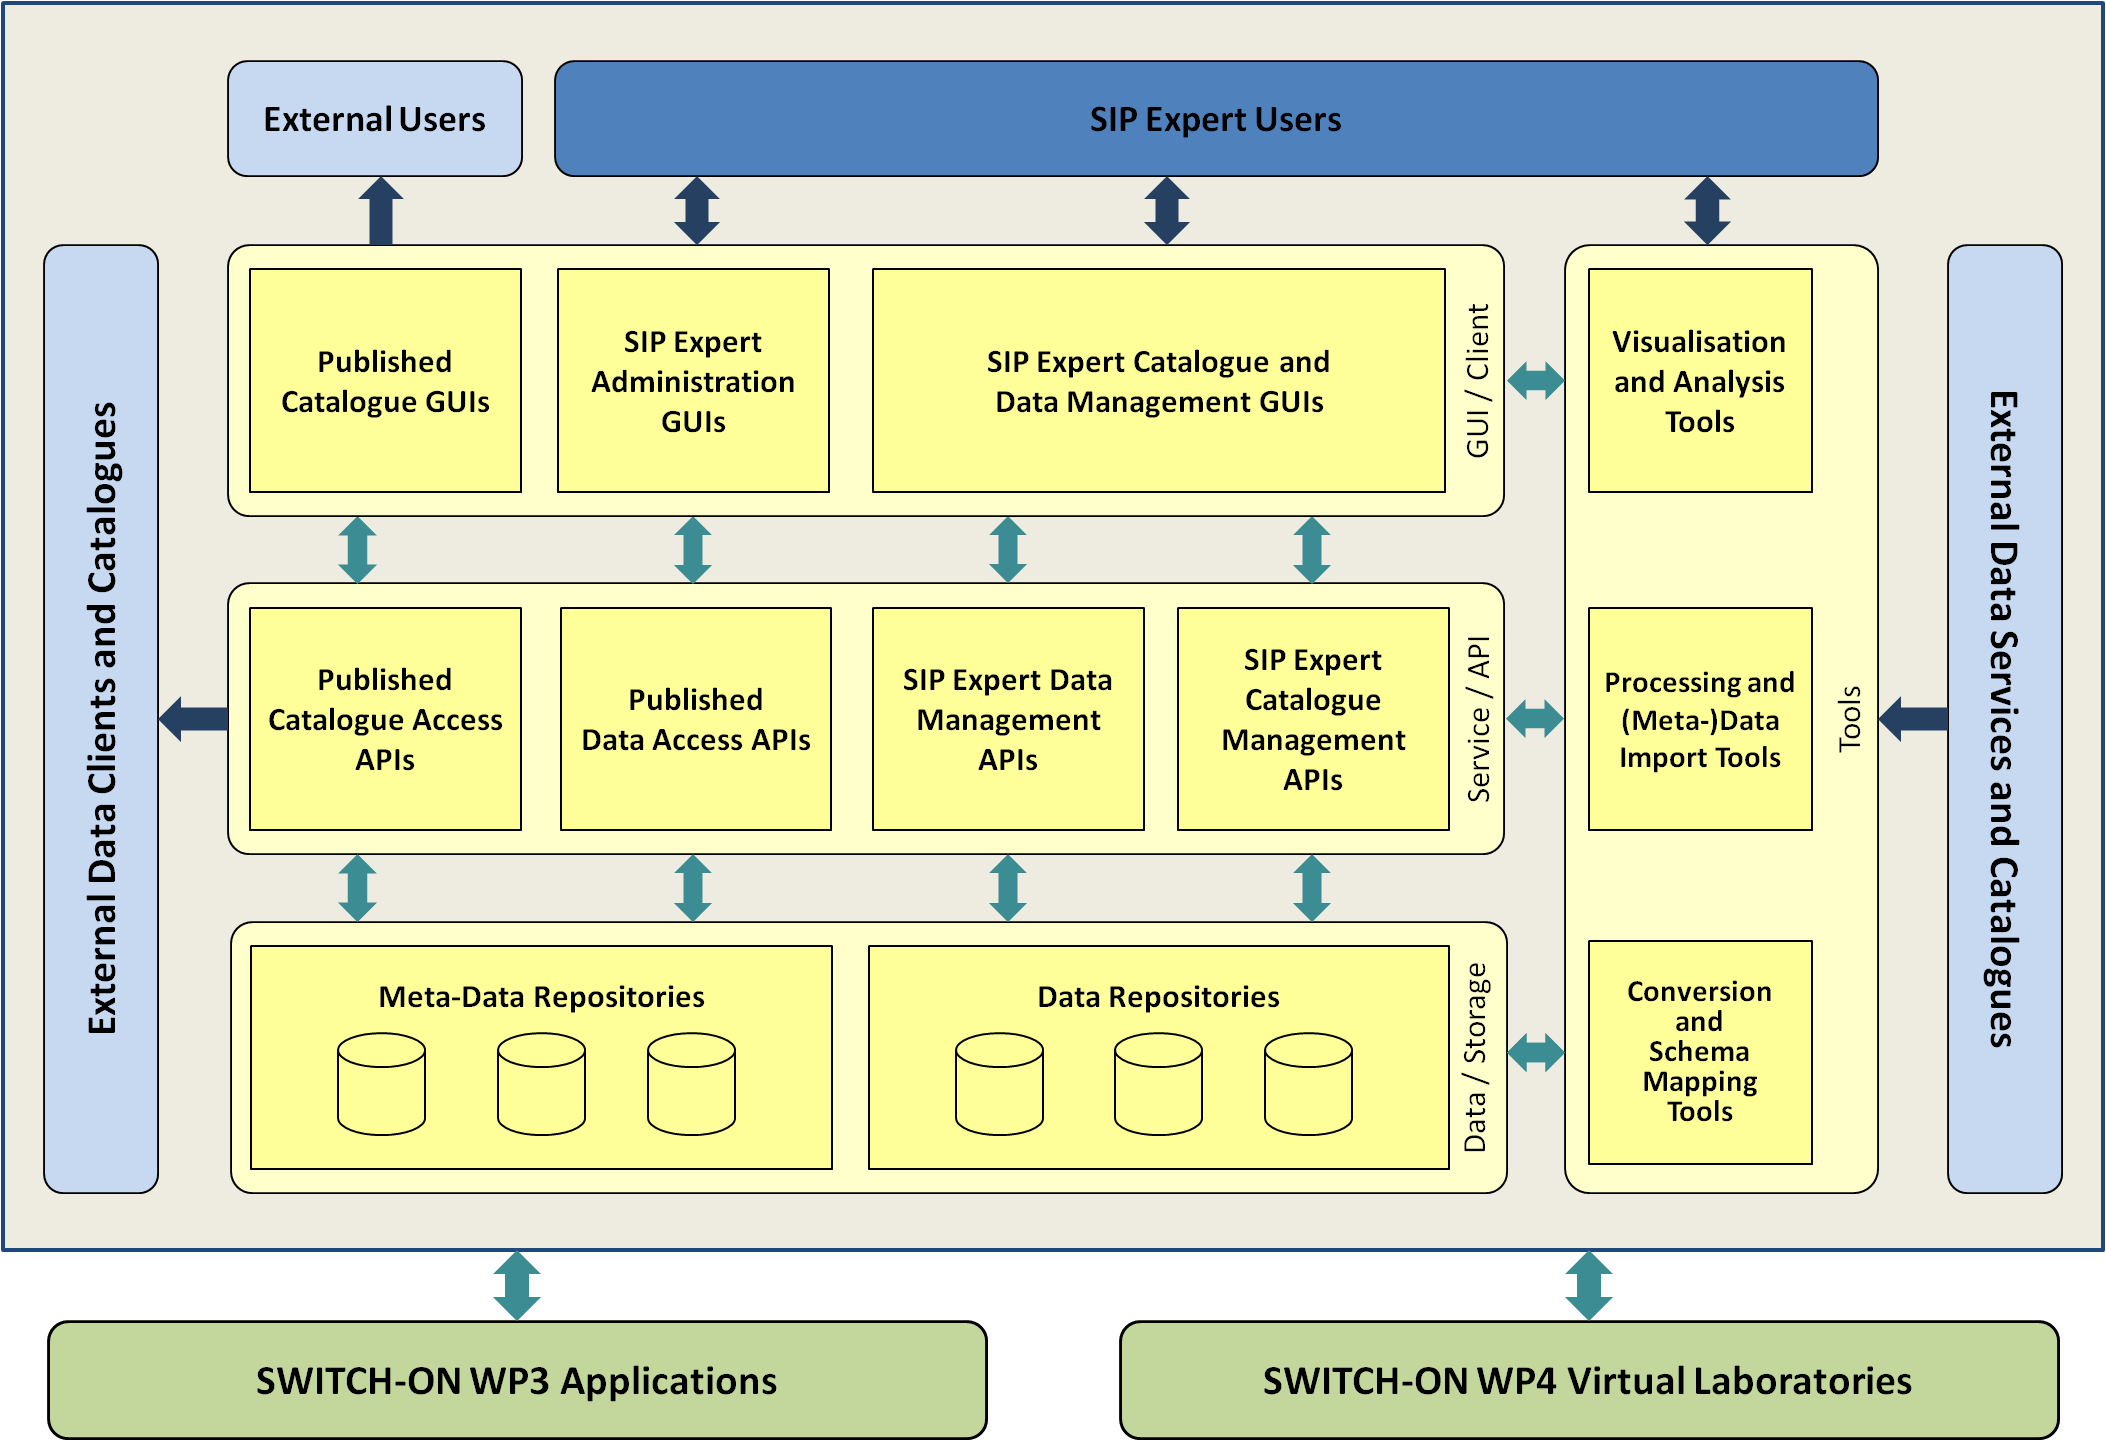 Architecture of the Spatial Information Platform